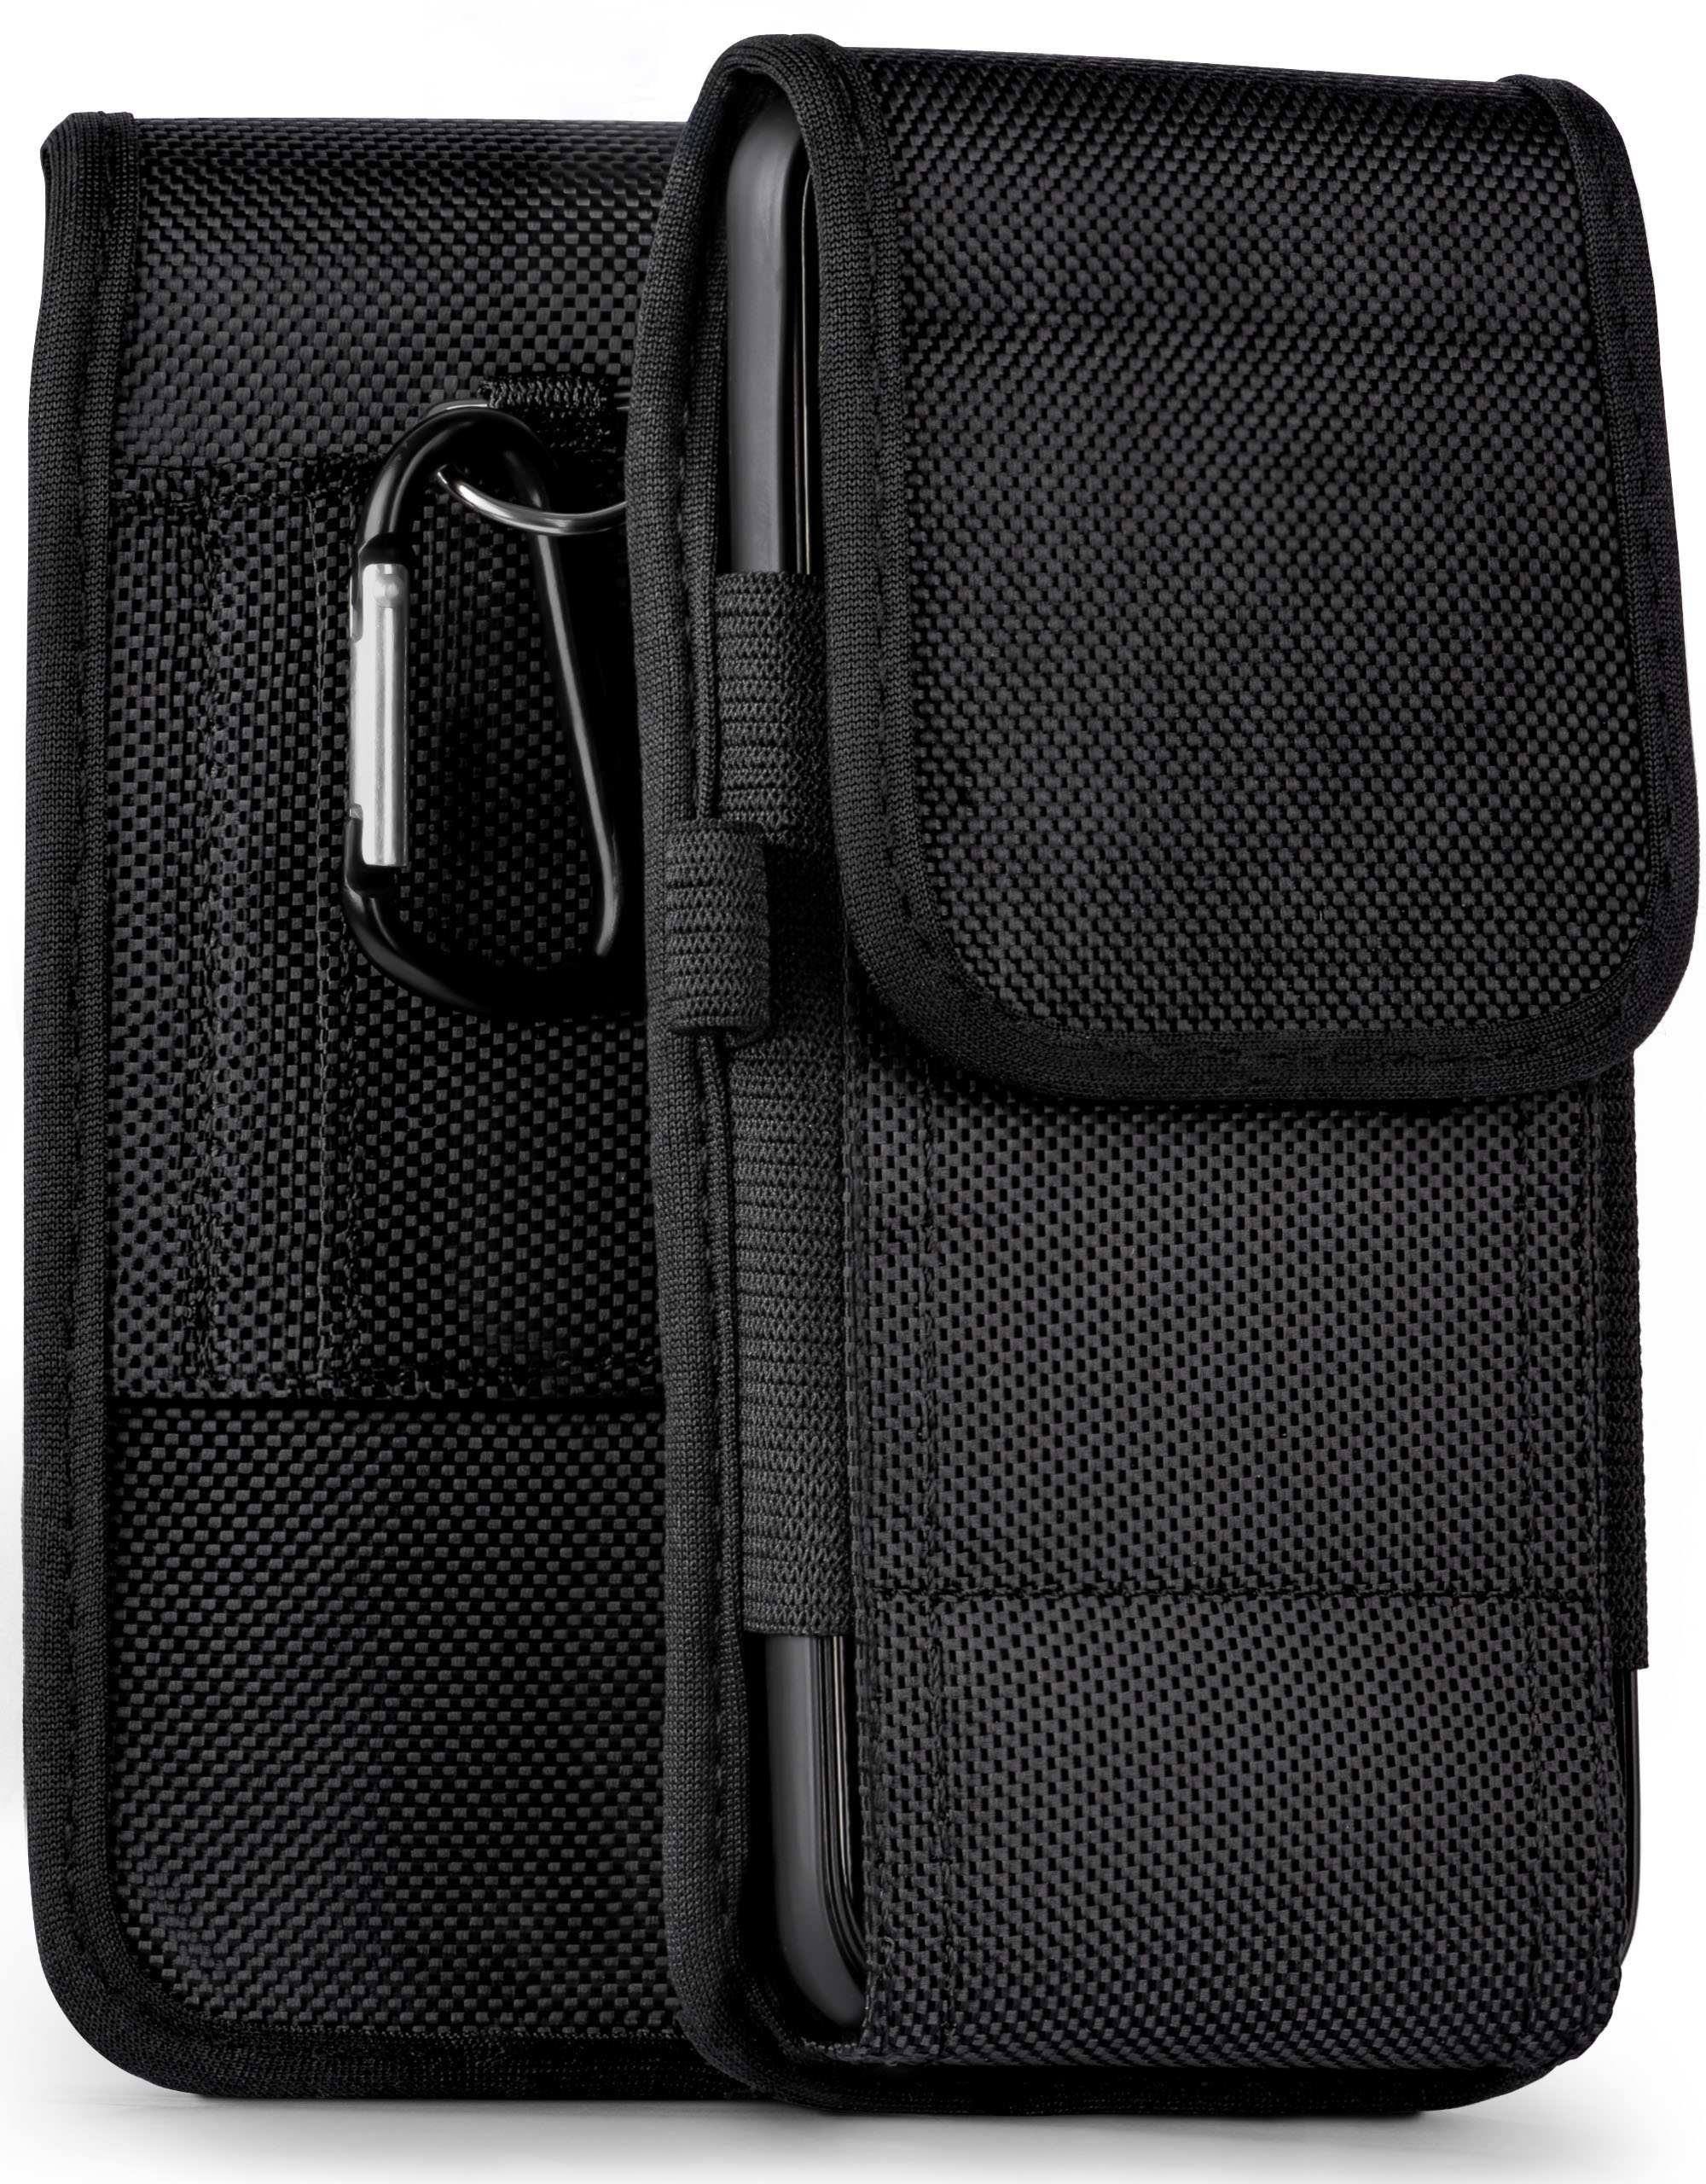 Case, Holster, 6A, Trail Honor MOEX Agility Huawei,